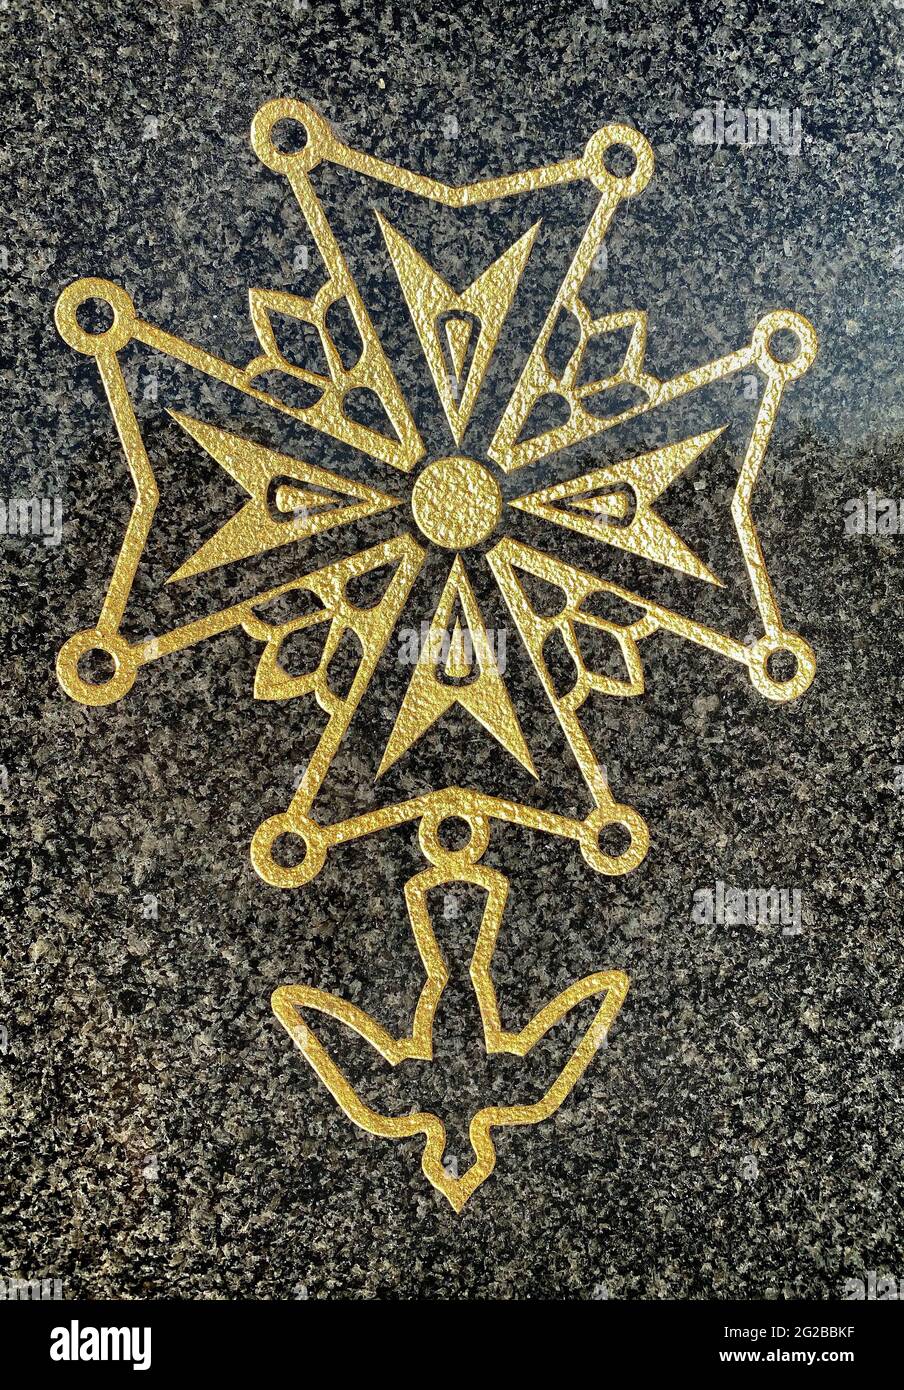 Huguenot cross on a grave in a Protestant cemetery. Cross evoking the Maltese cross and the Languedoc cross, with fleur de lis, pearls and dove of the Stock Photo